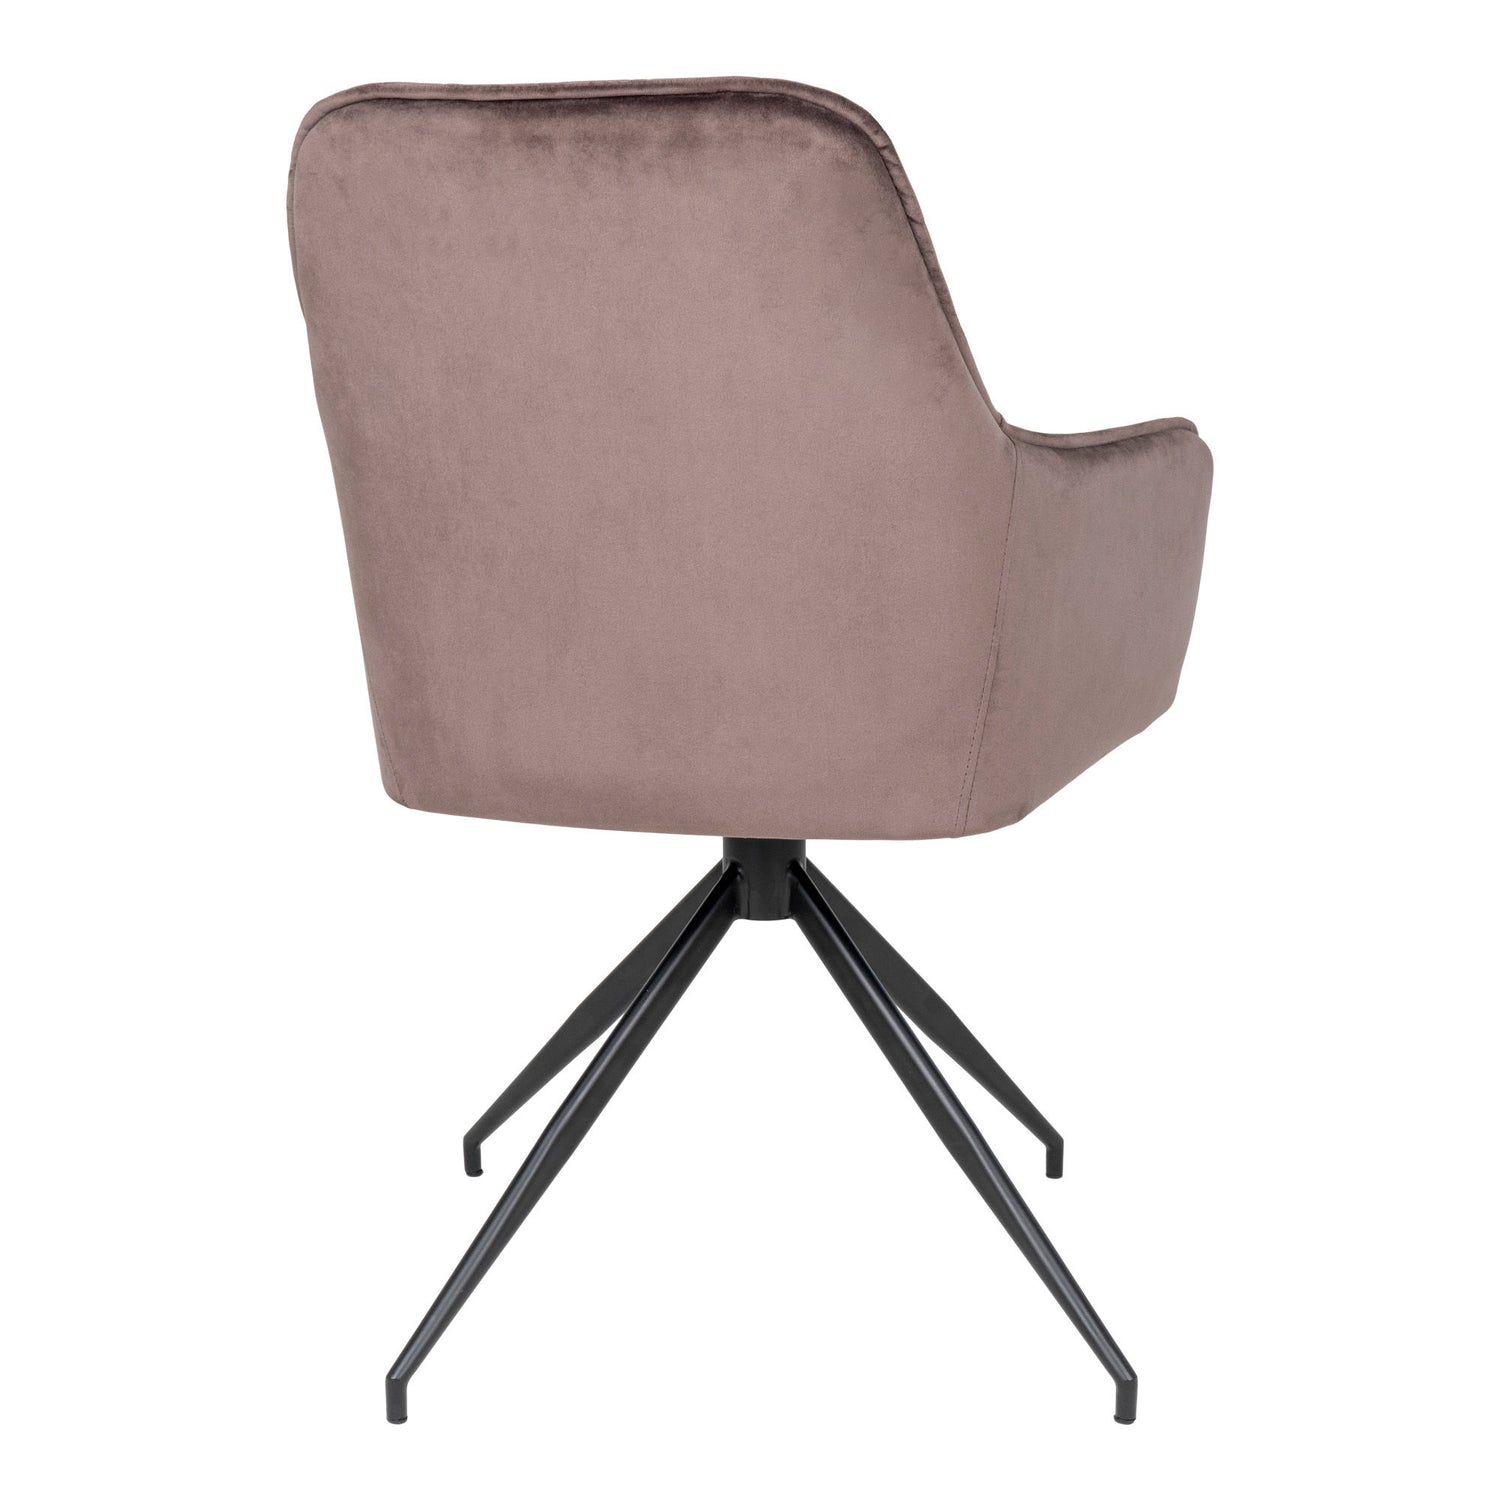 House Nordic - Harbo Dining Table Chair with Swivel Foot